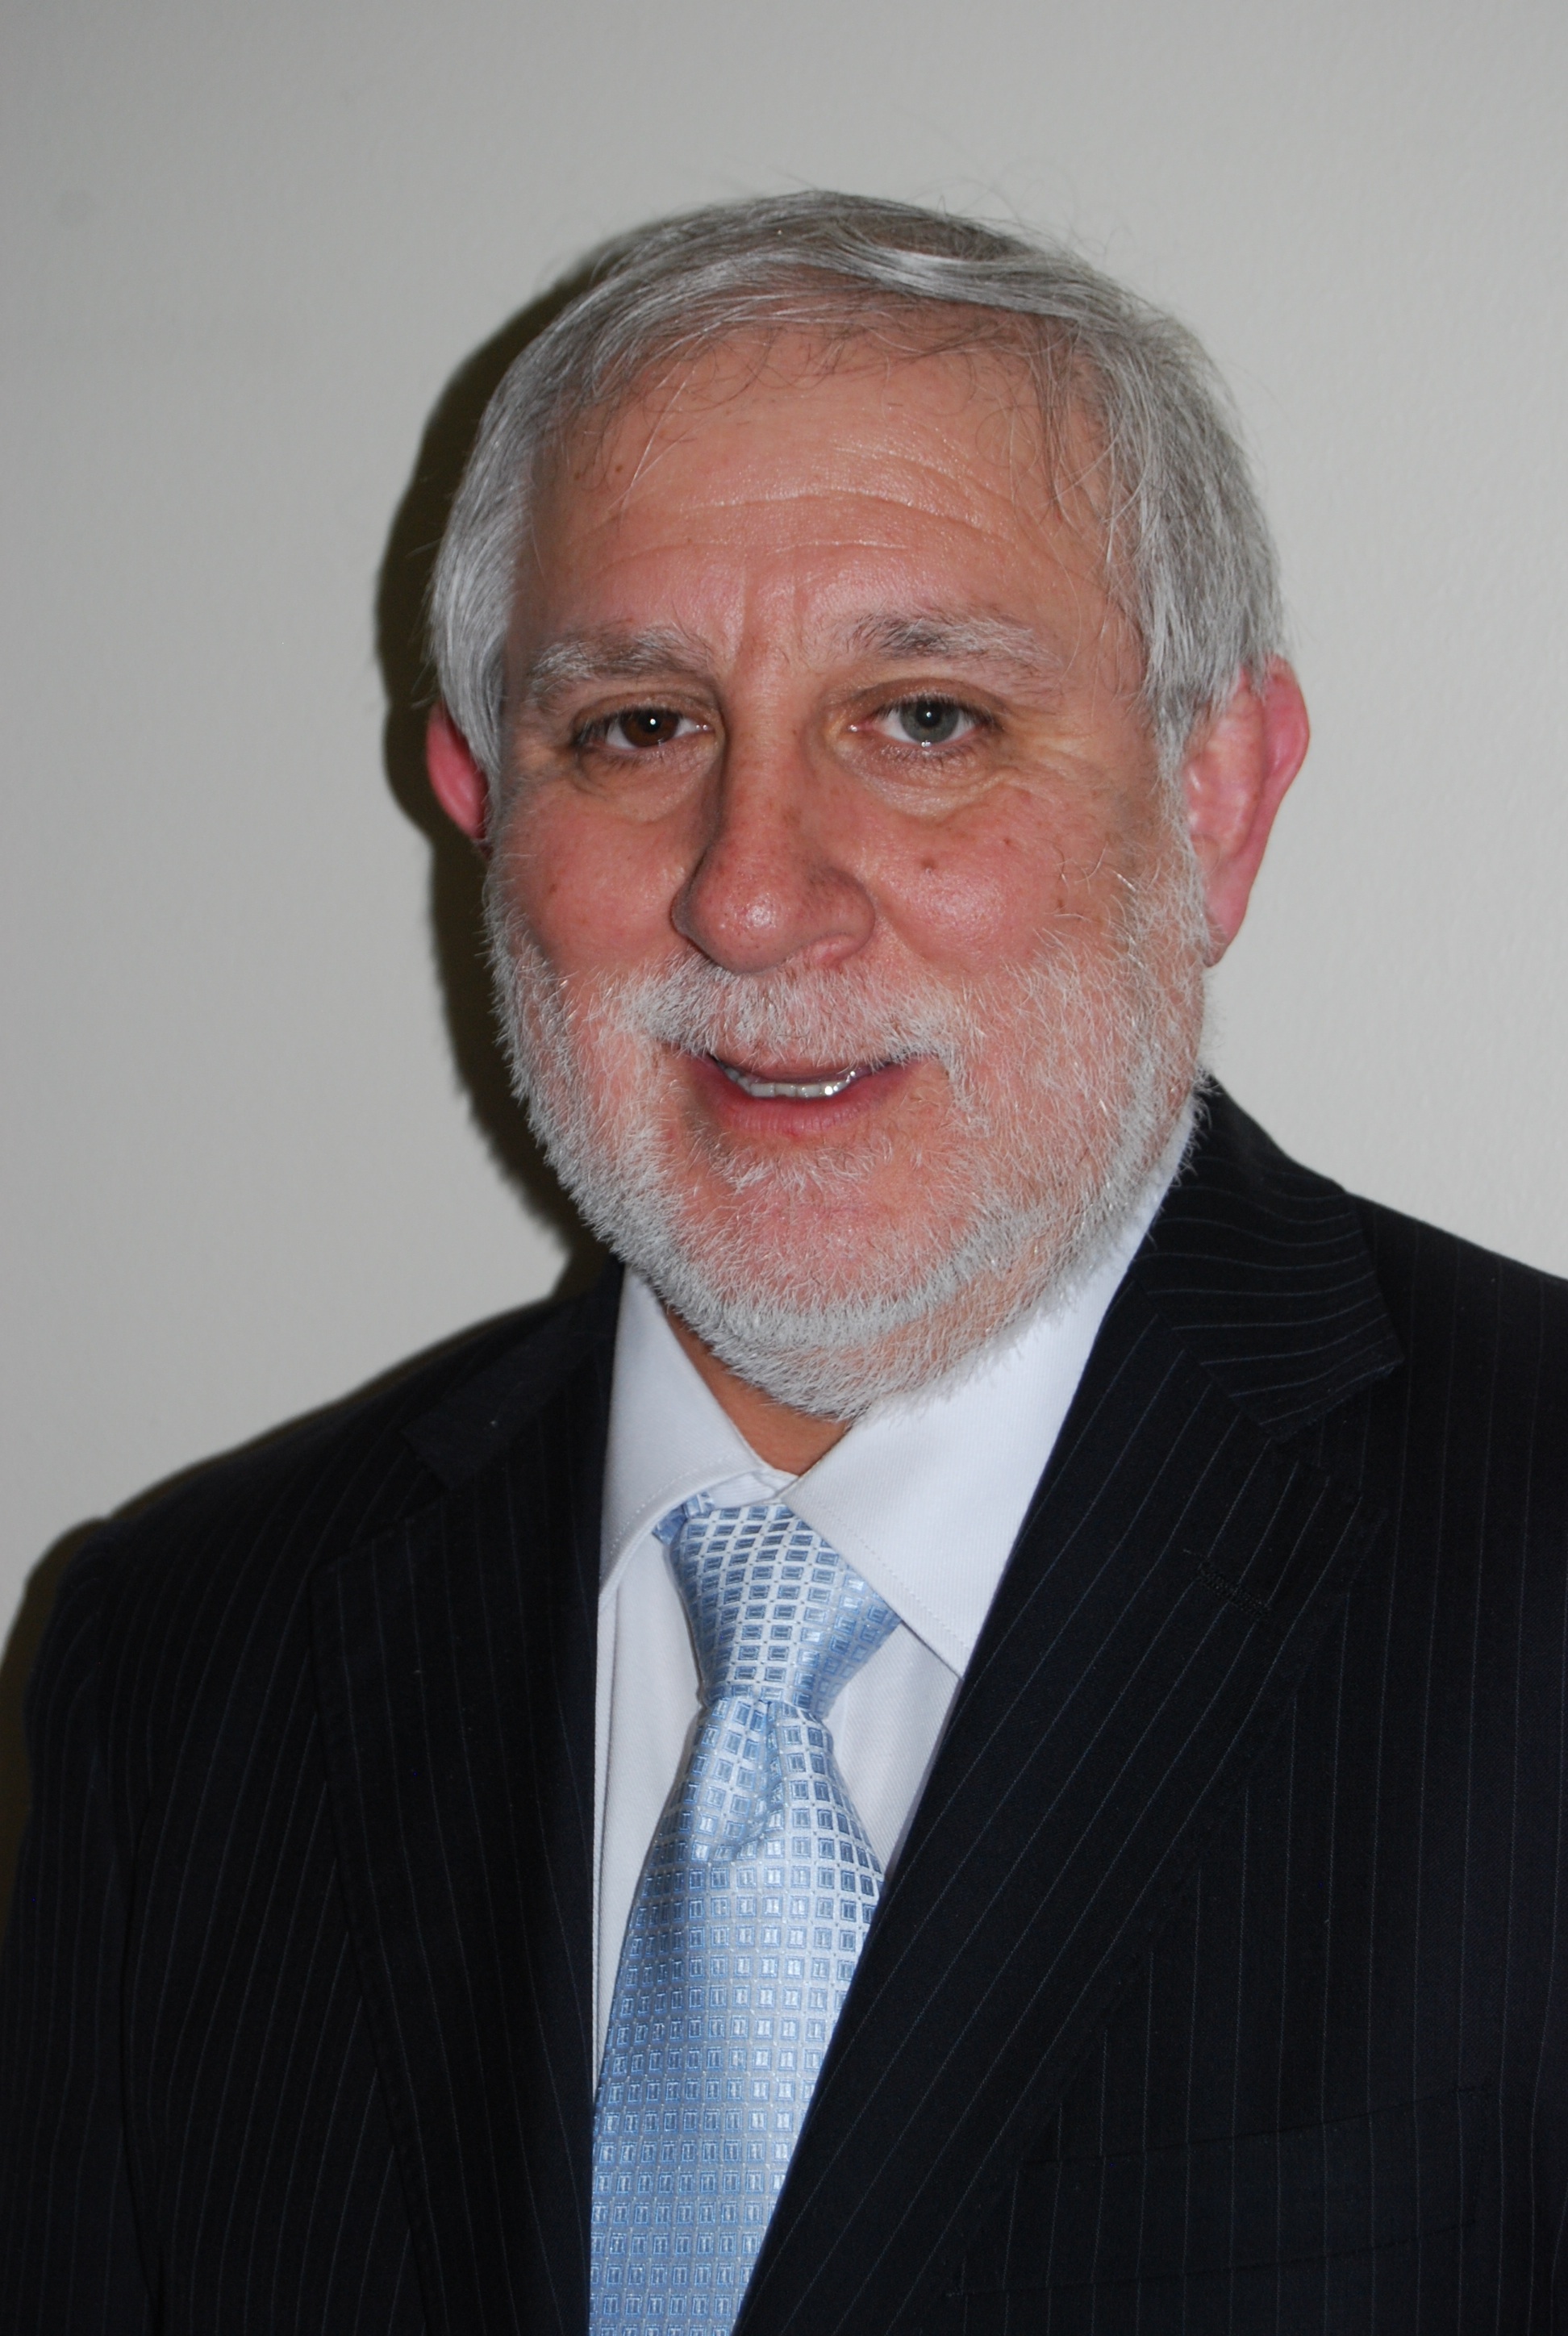 Professor Miguel Ángel Pinochet from Santiago, president of the Chilean Society of Radiology